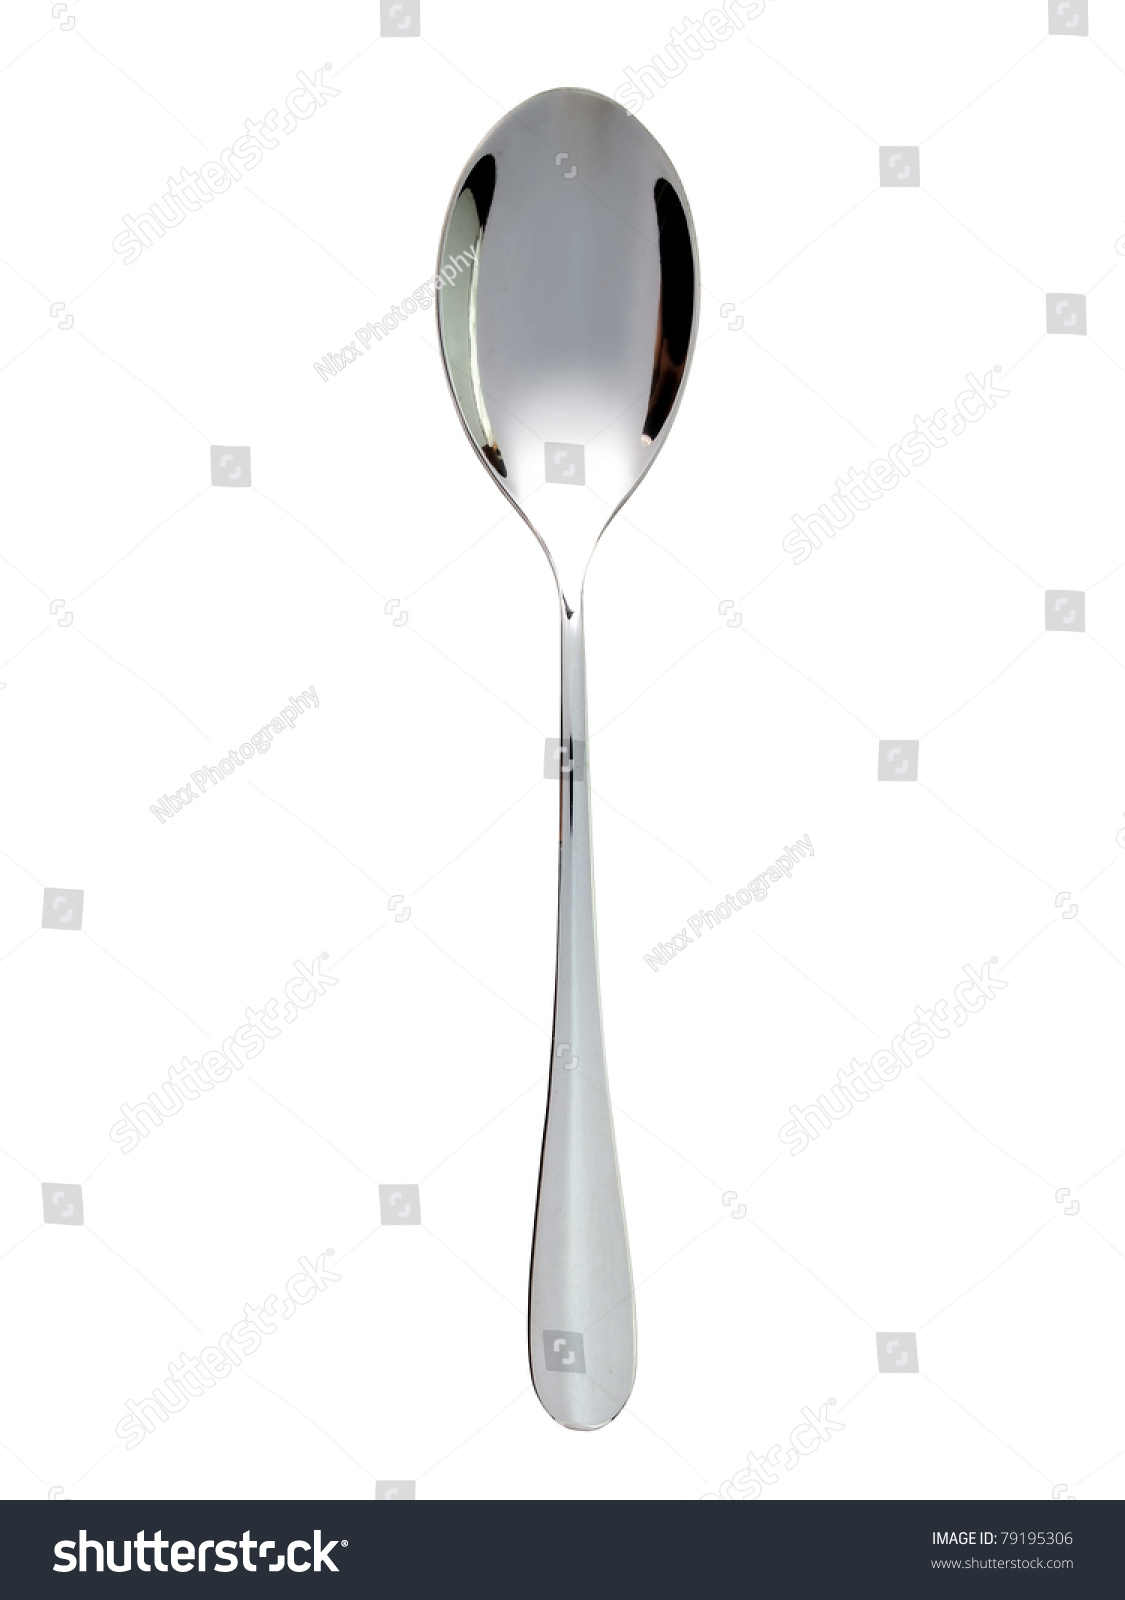 Silver spoon on white background #79195306